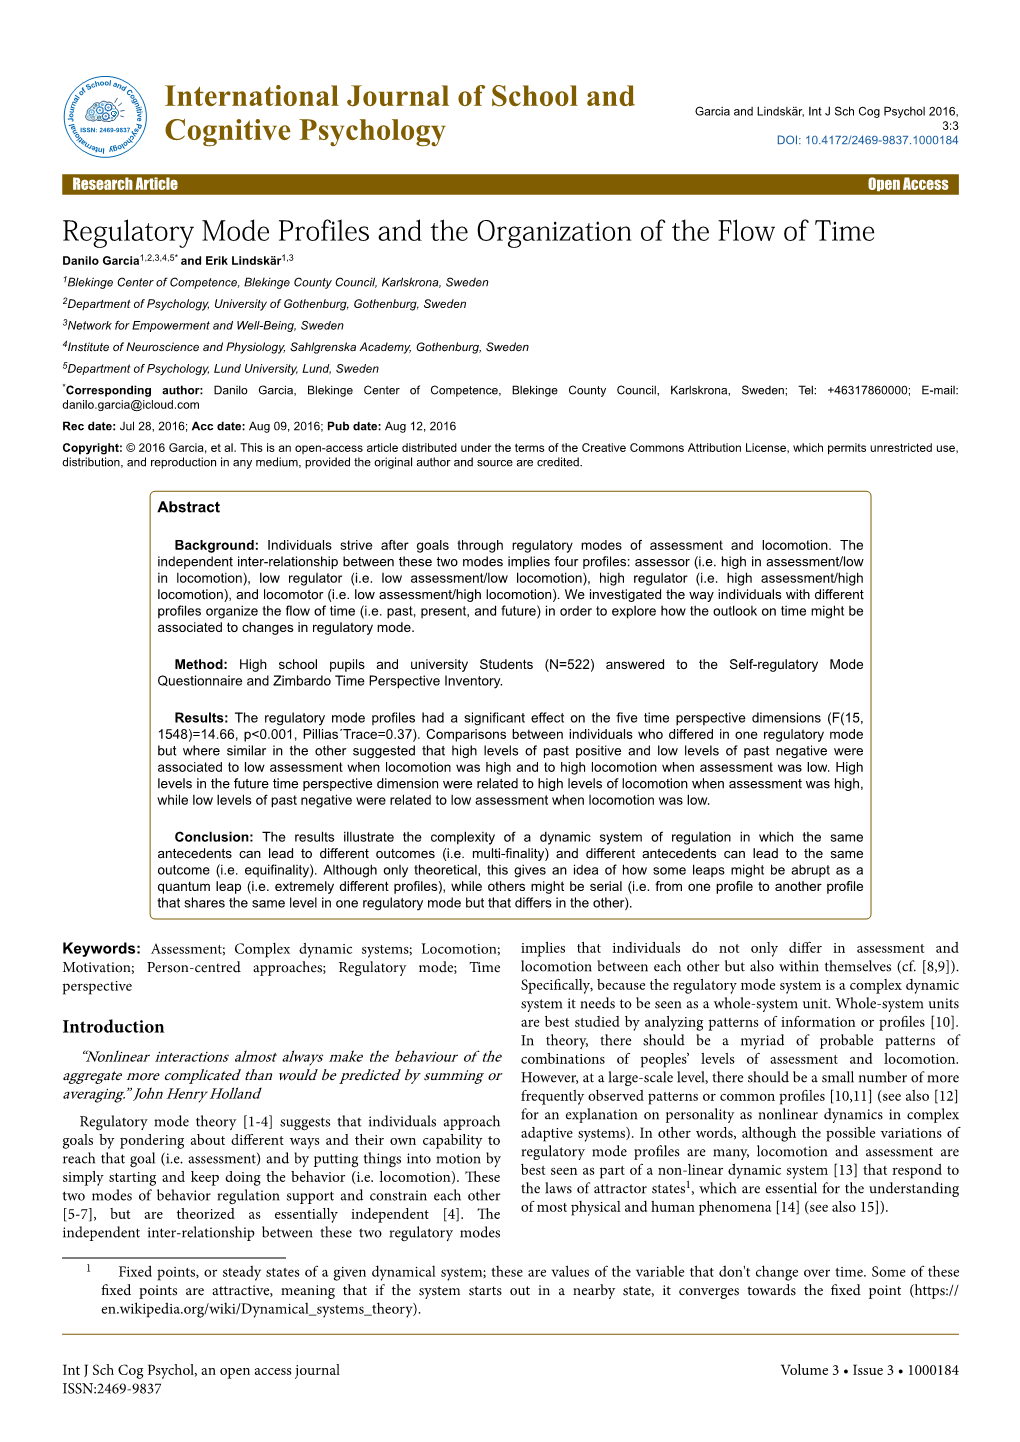 Regulatory Mode Profiles and the Organization of the Flow of Time